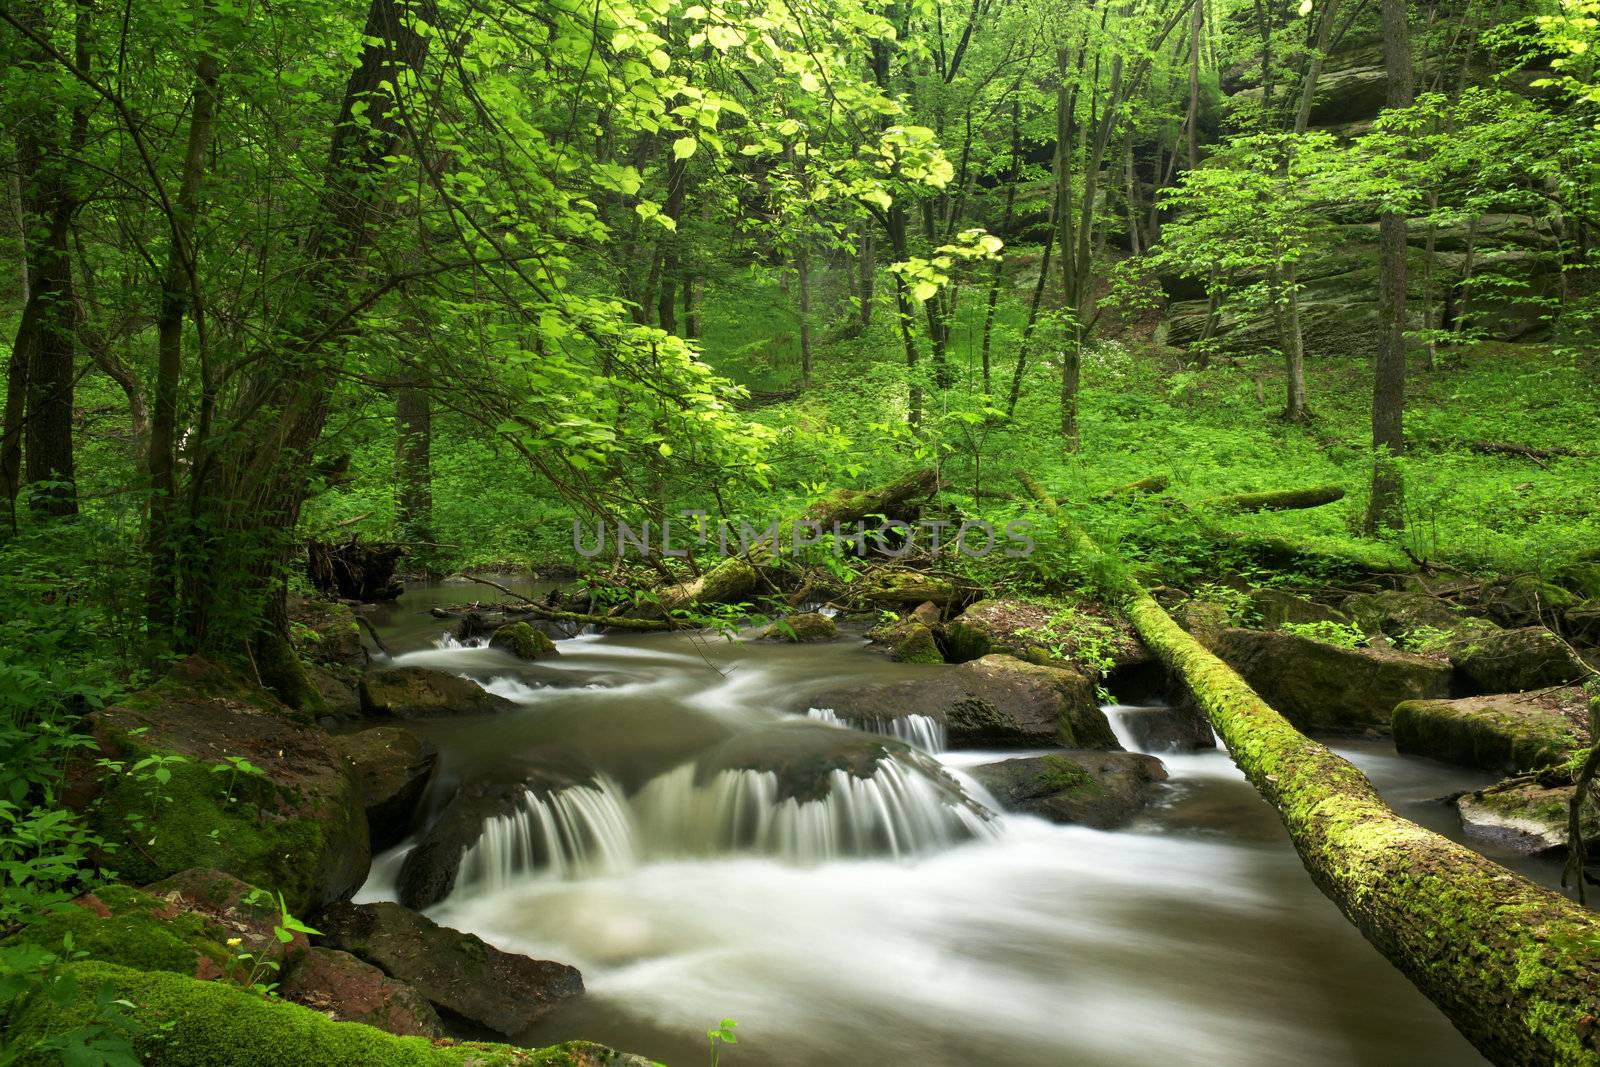 An image of a waterfall in spring forest